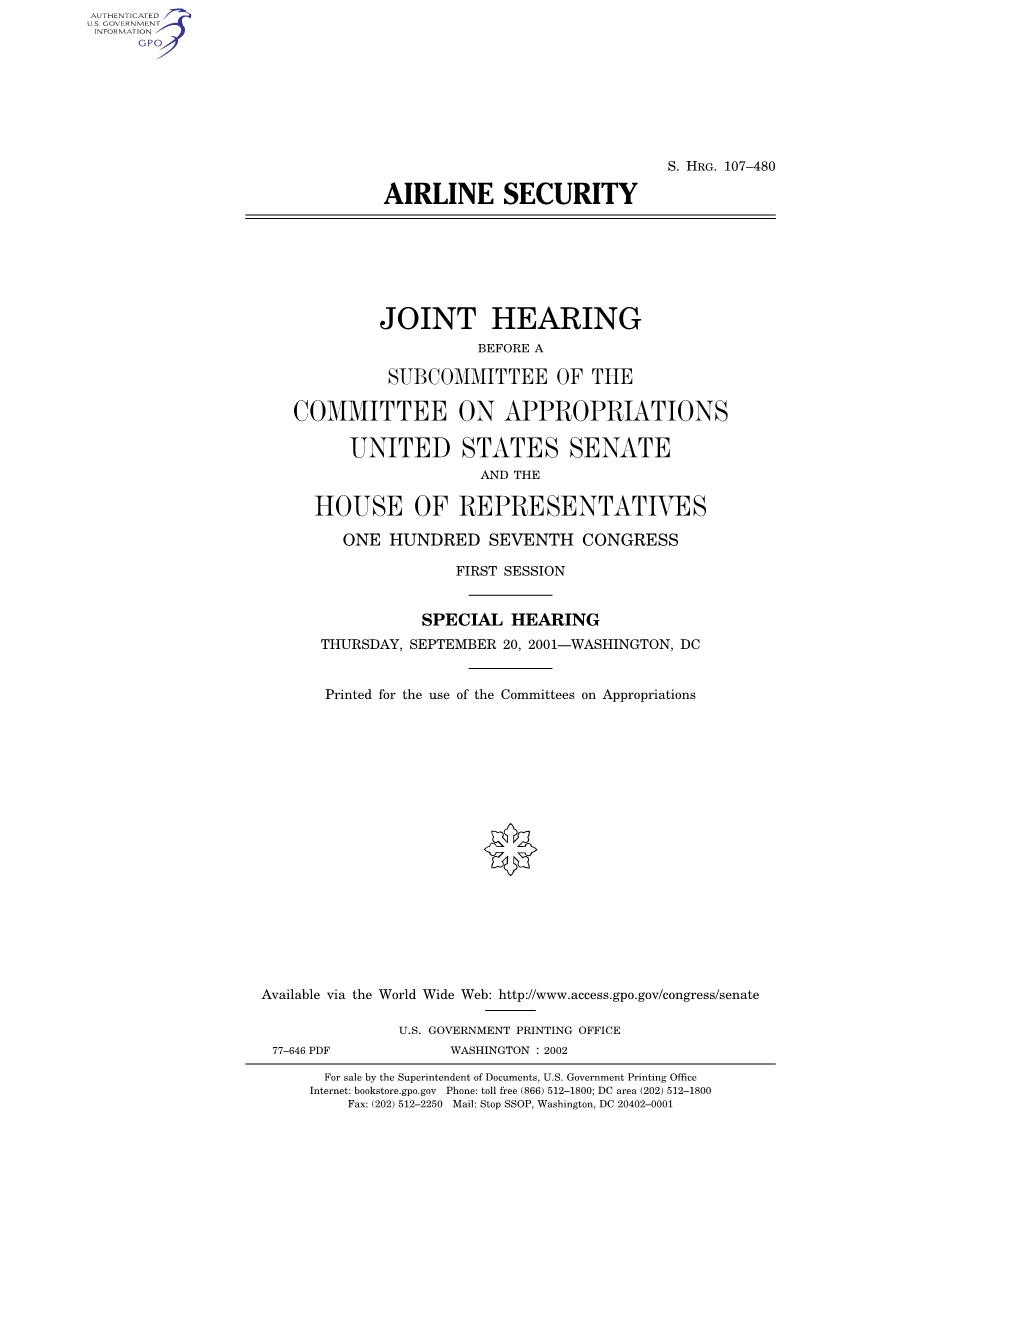 Airline Security Joint Hearing Committee On